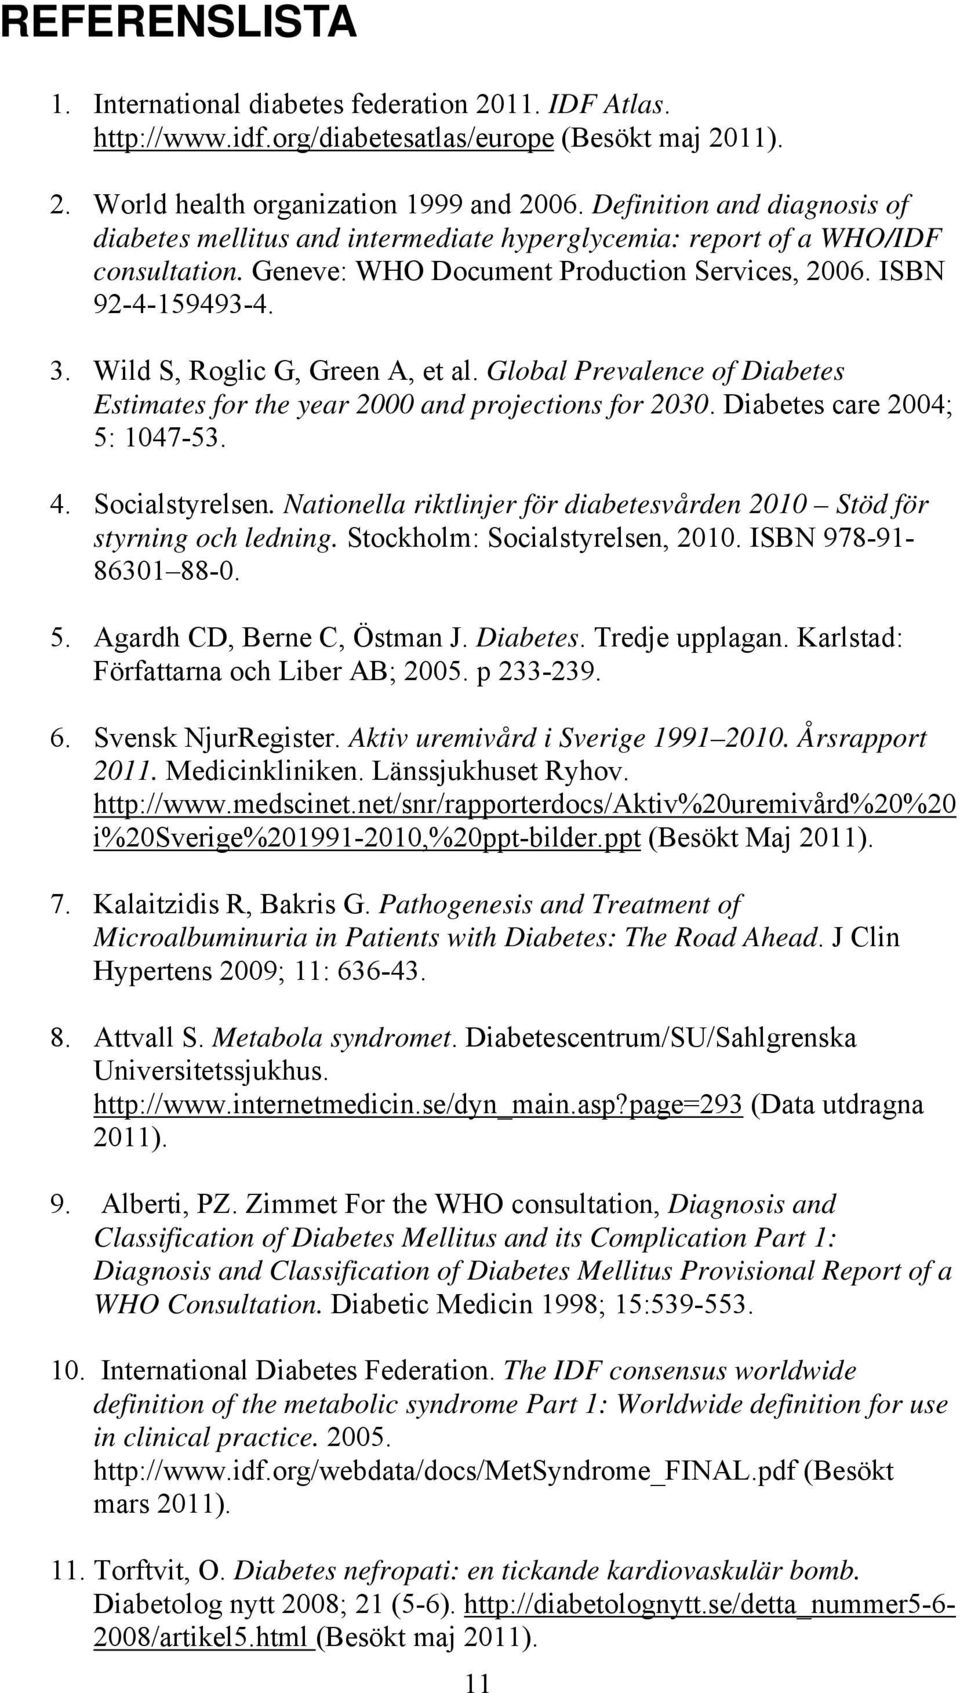 Wild S, Roglic G, Green A, et al. Global Prevalence of Diabetes Estimates for the year 2000 and projections for 2030. Diabetes care 2004; 5: 1047-53. 4. Socialstyrelsen.